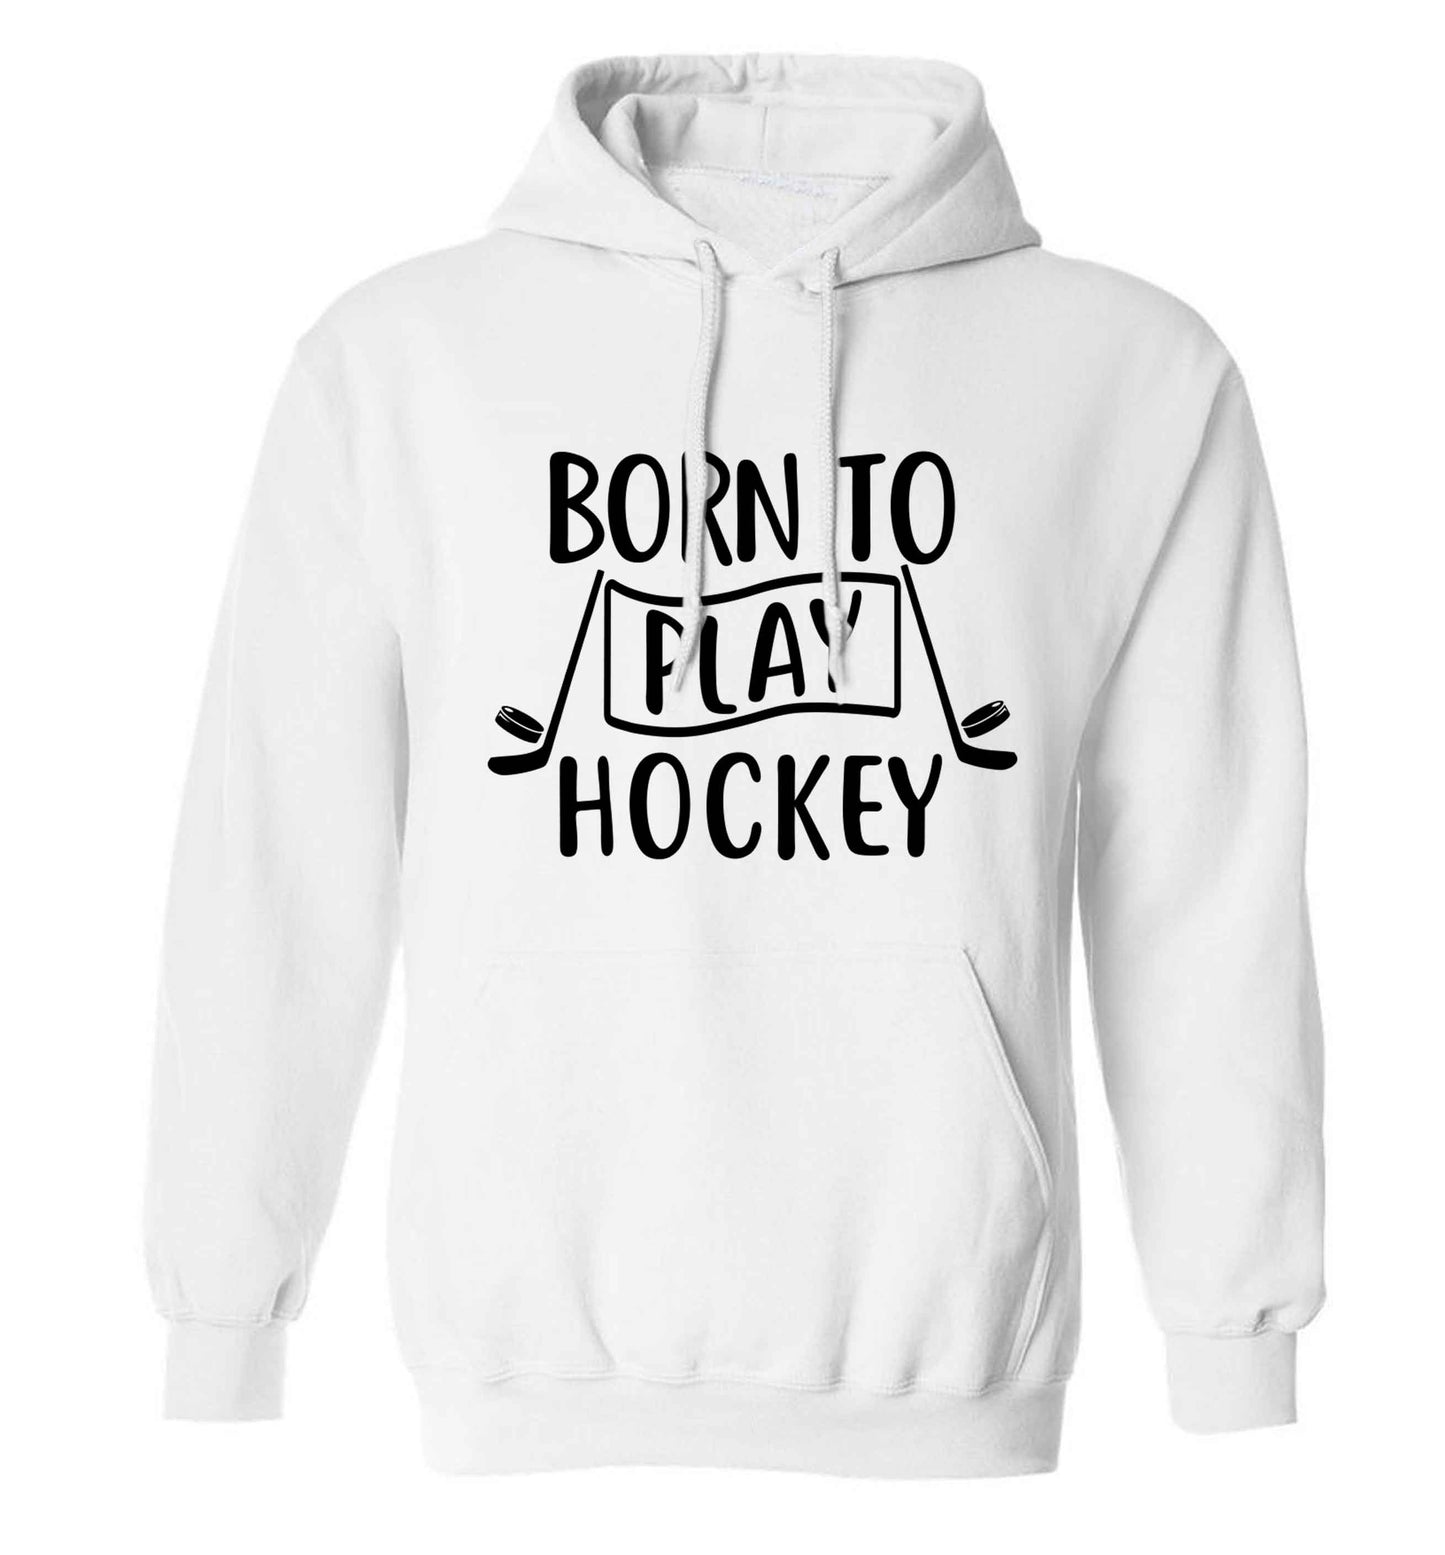 Born to play hockey adults unisex white hoodie 2XL